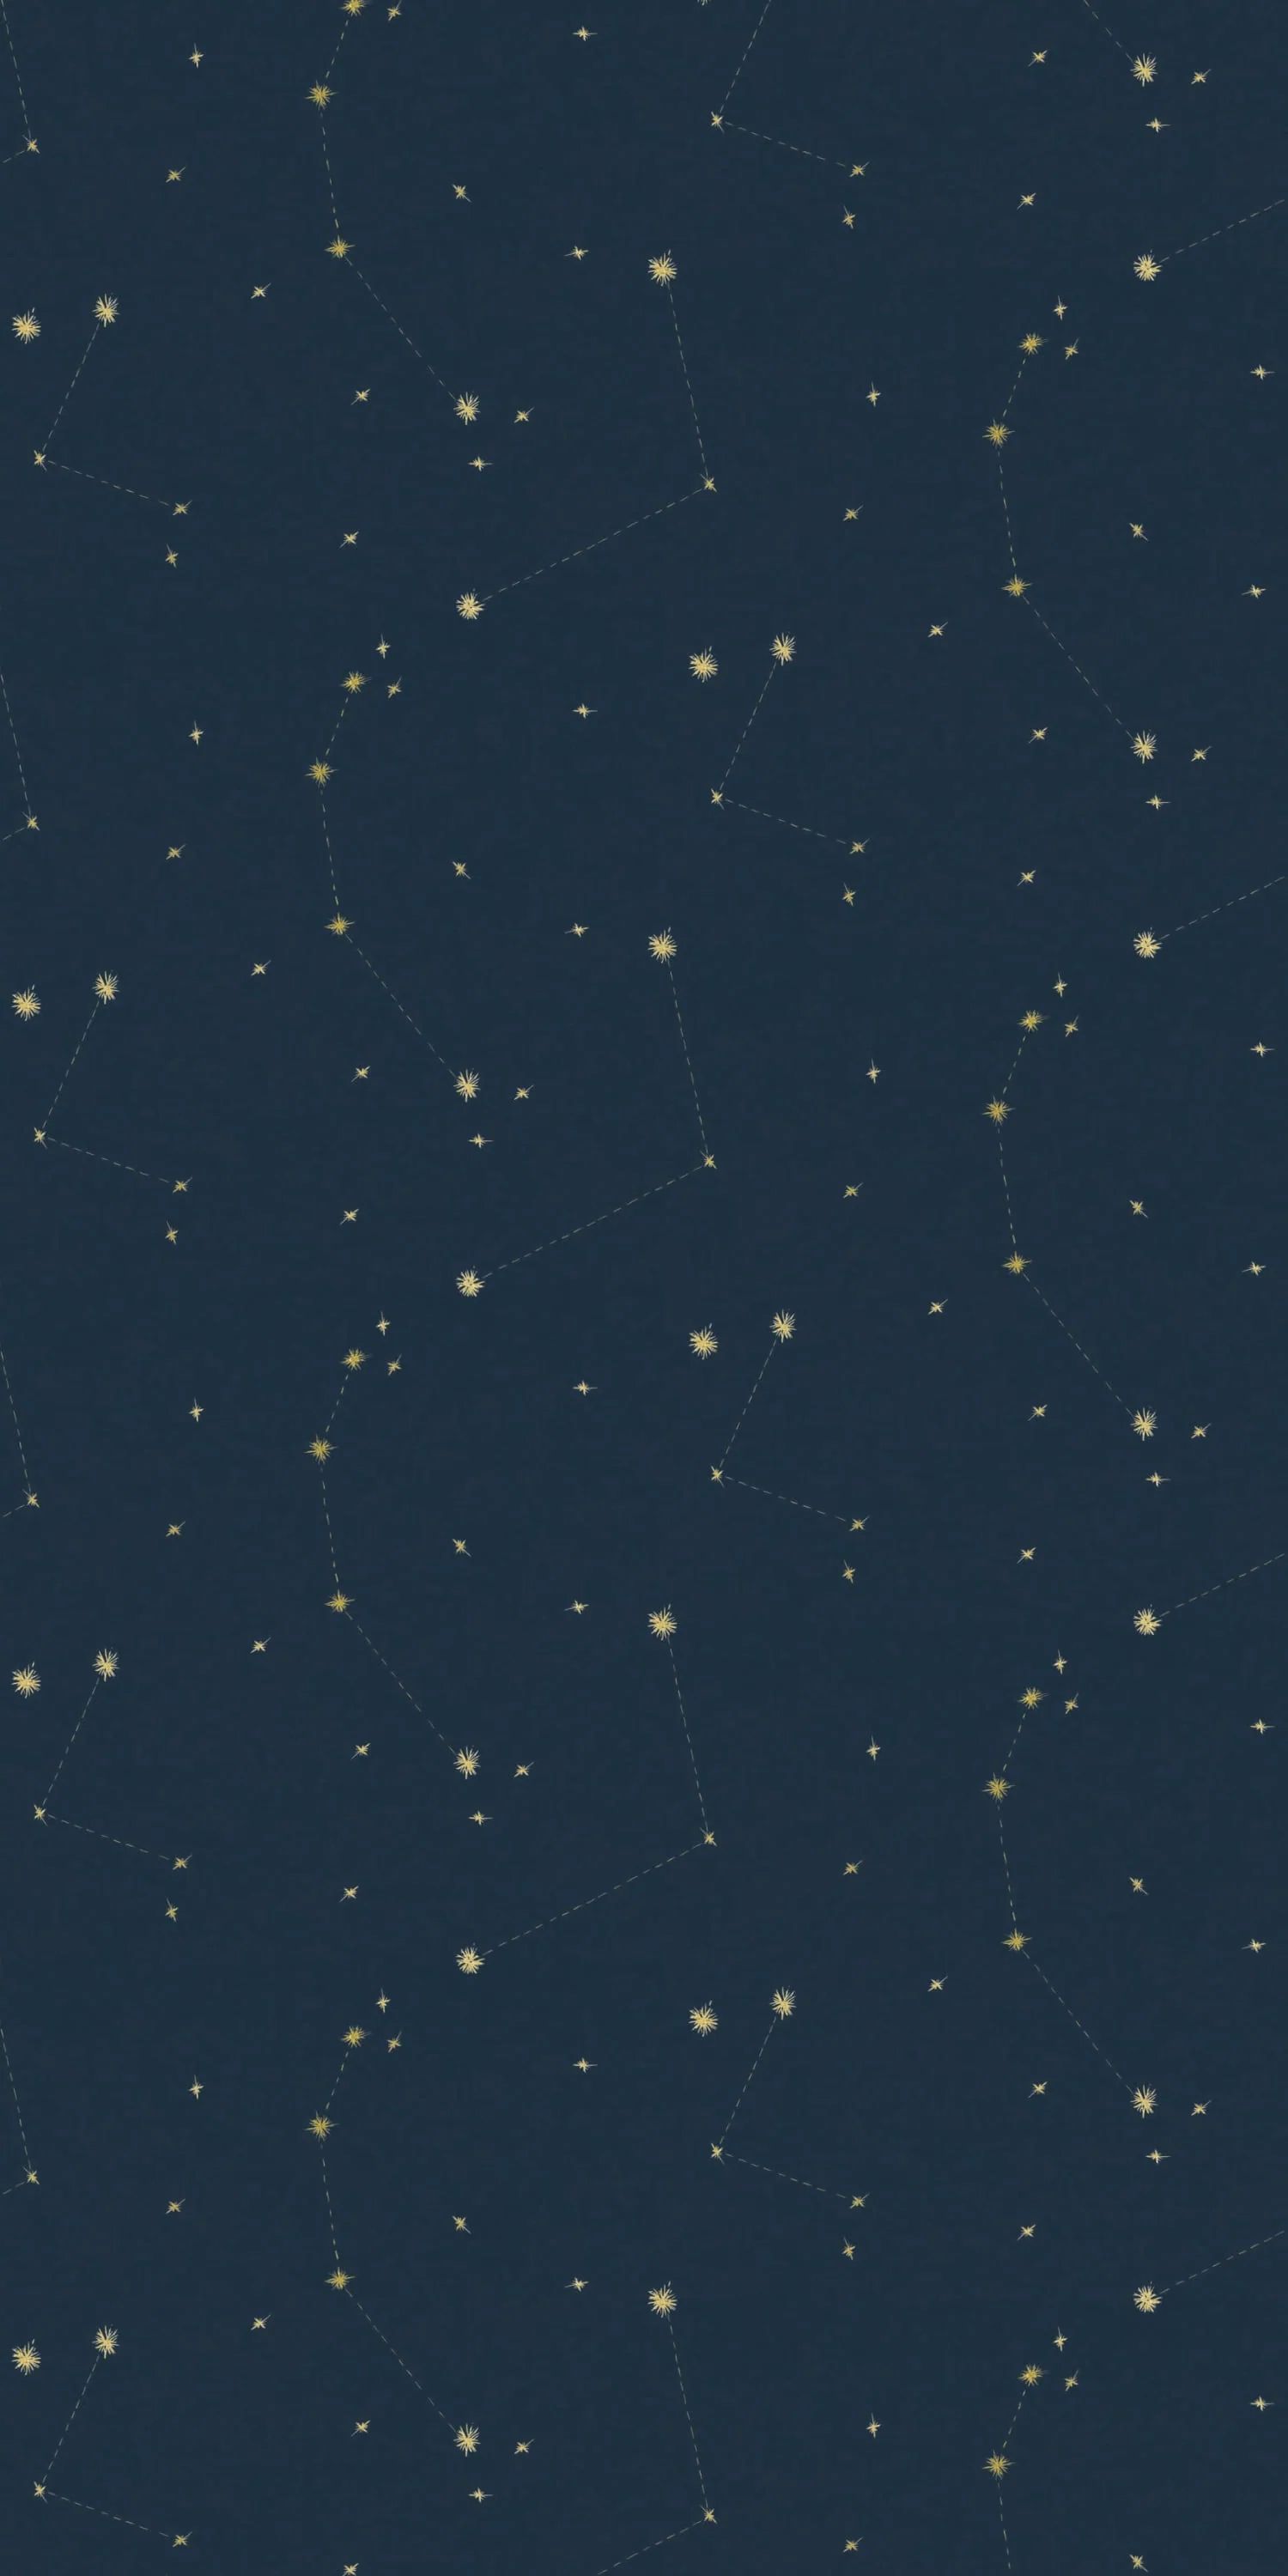 Constellations | Chasing Paper